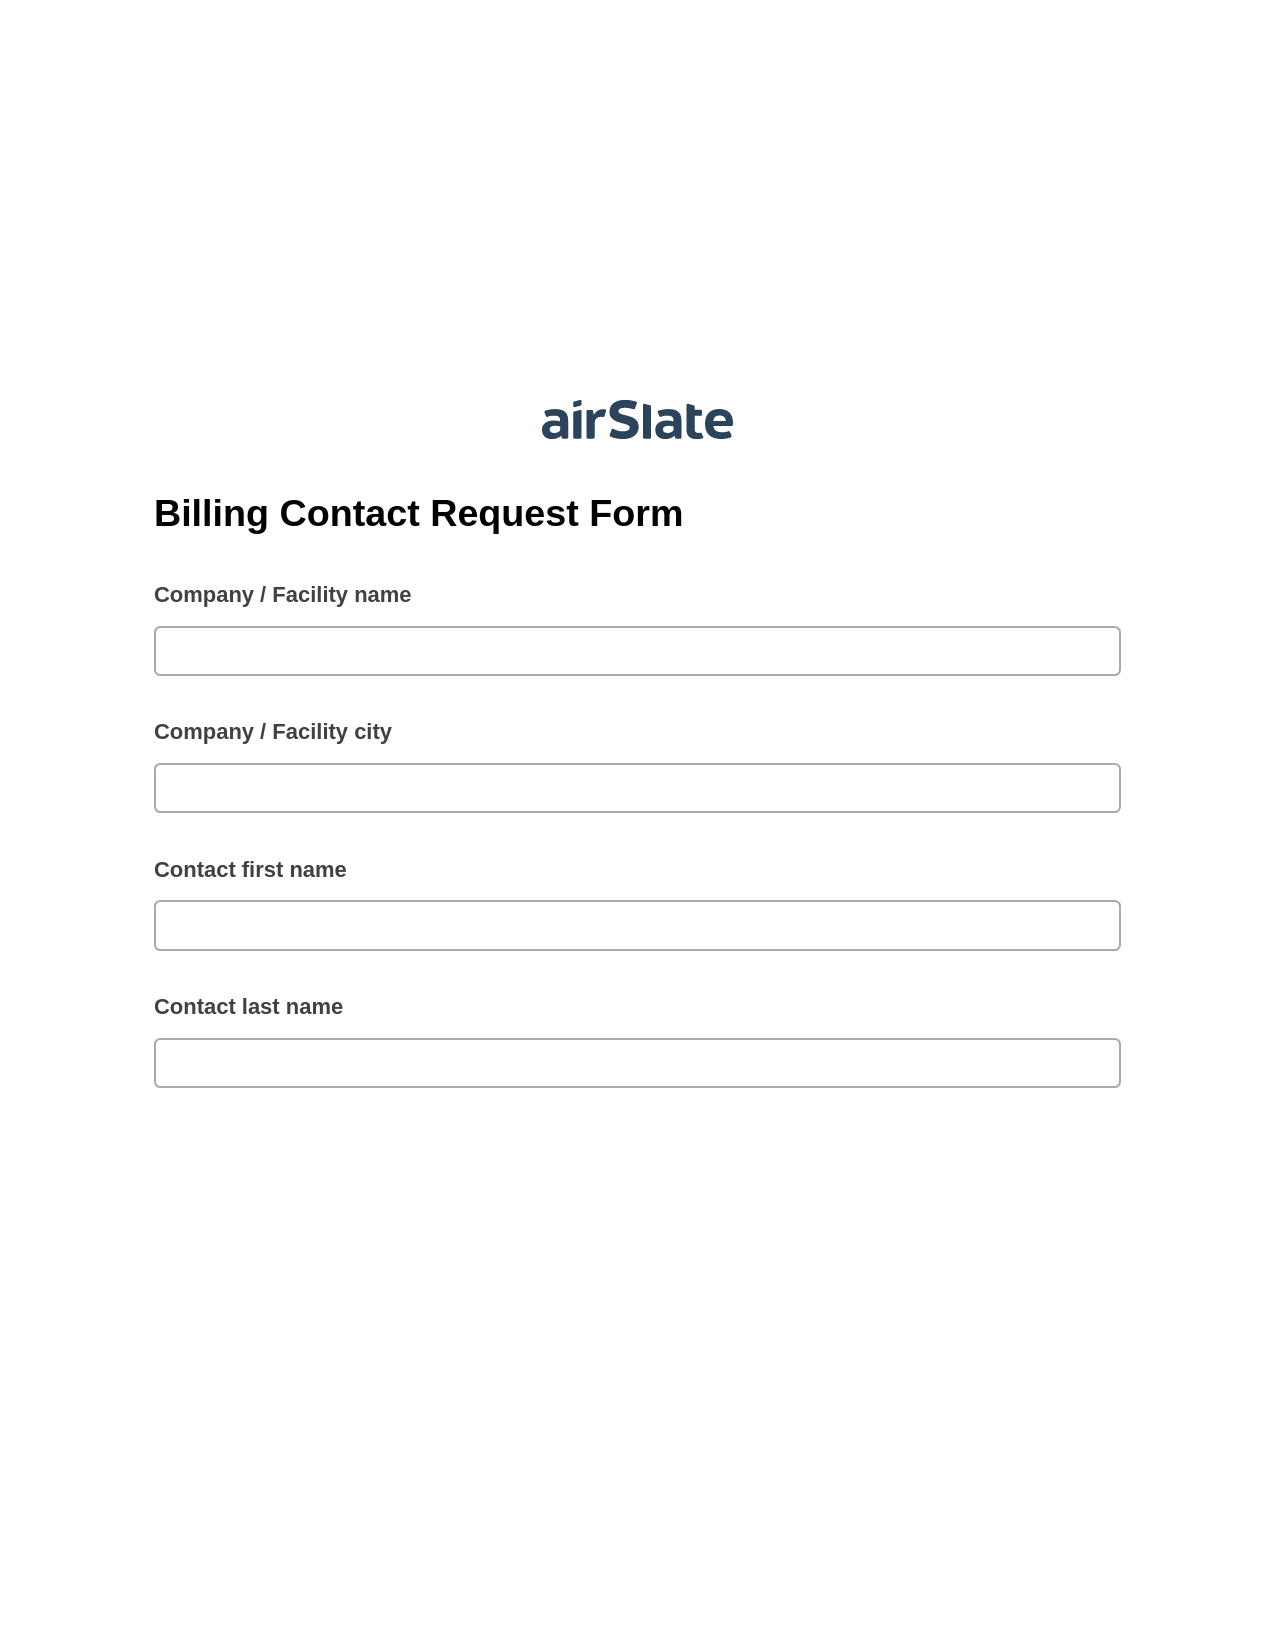 Multirole Billing Contact Request Form Pre-fill Slate from MS Dynamics 365 Records Bot, Update MS Dynamics 365 Records Bot, Export to Google Sheet Bot